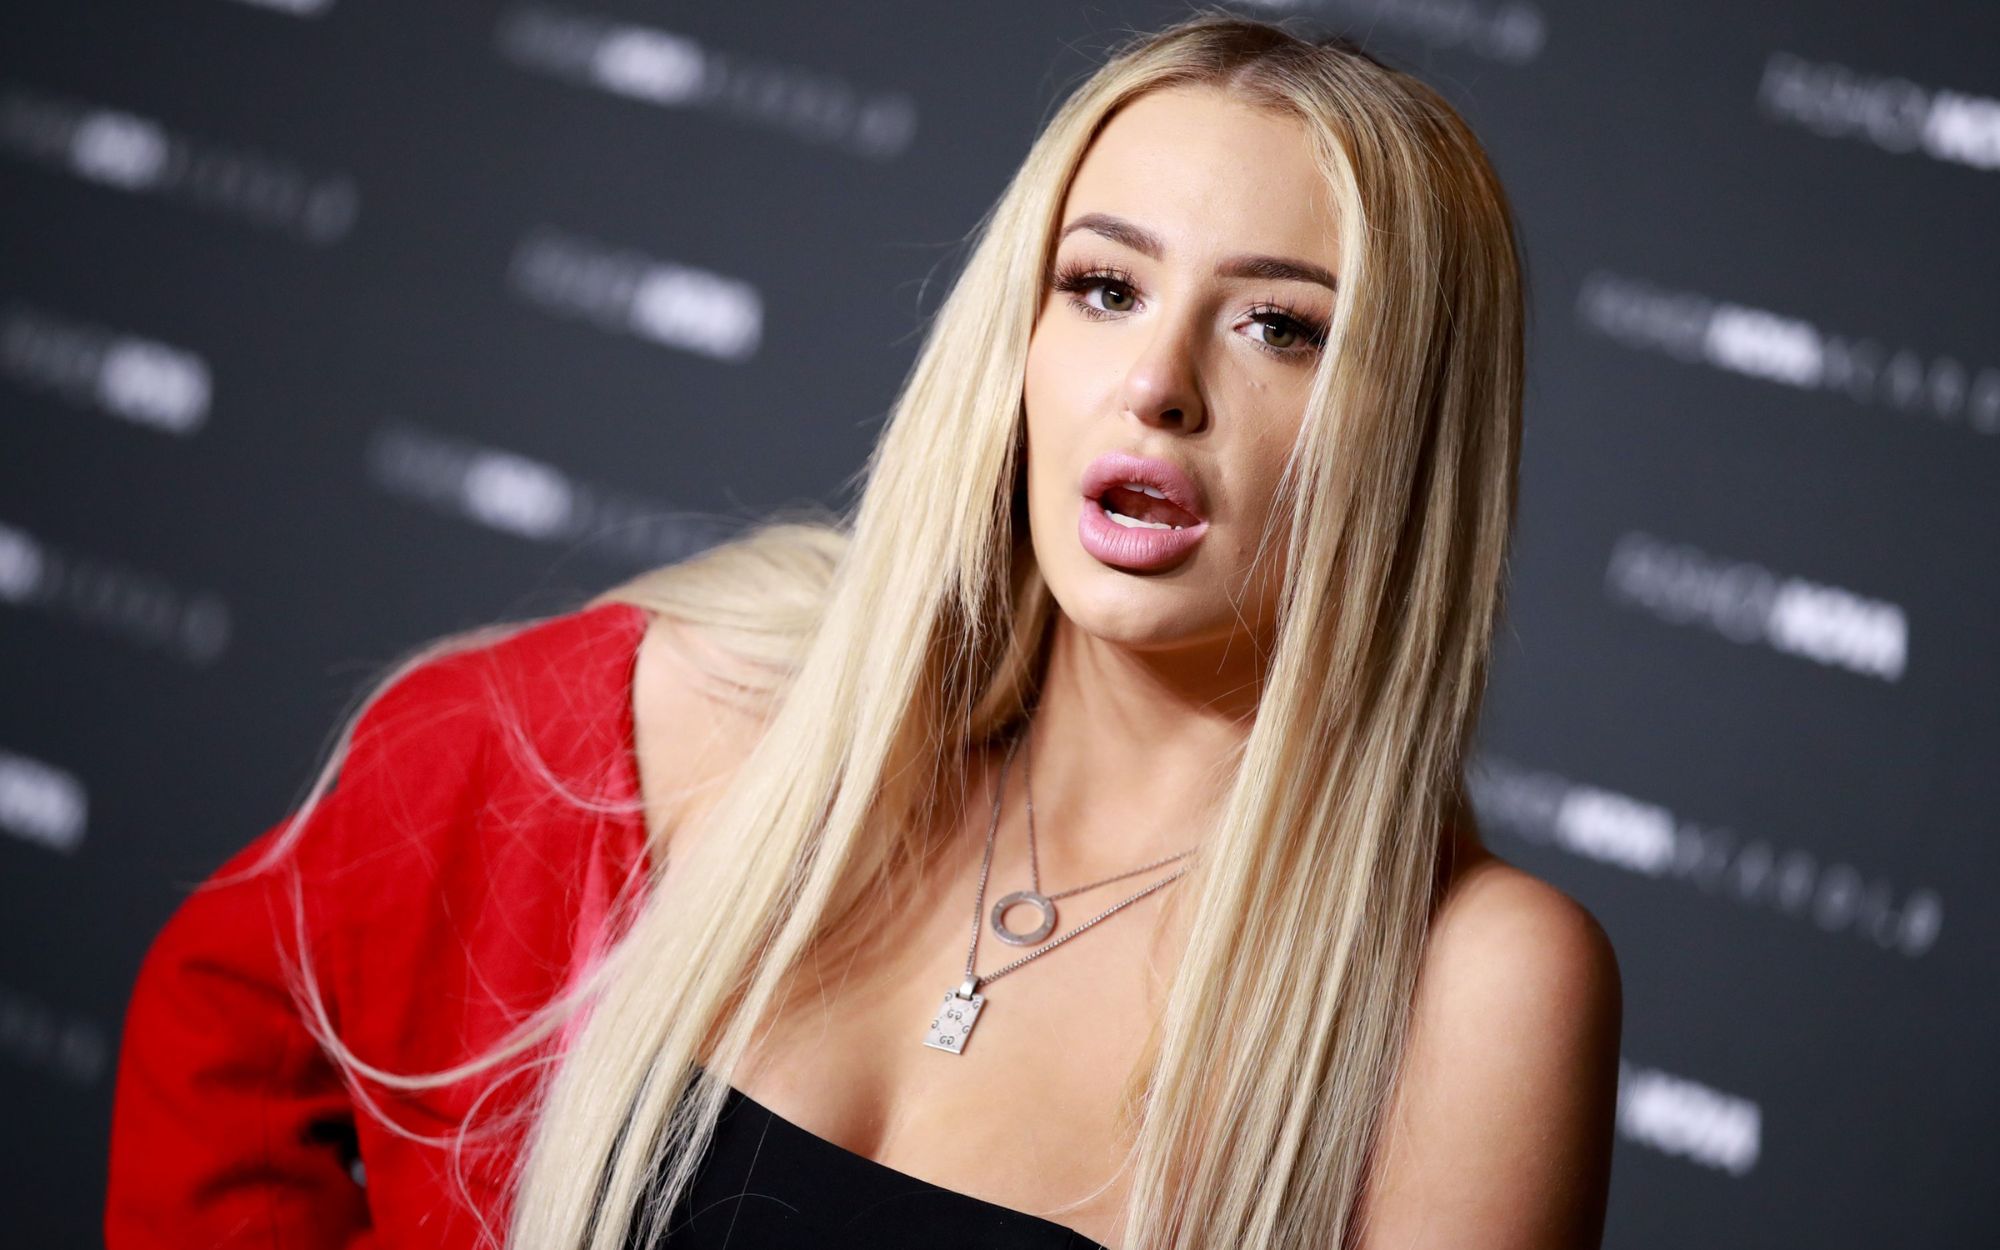 Tana Mongeau Onlyfans Free - What Is She Up To Now?